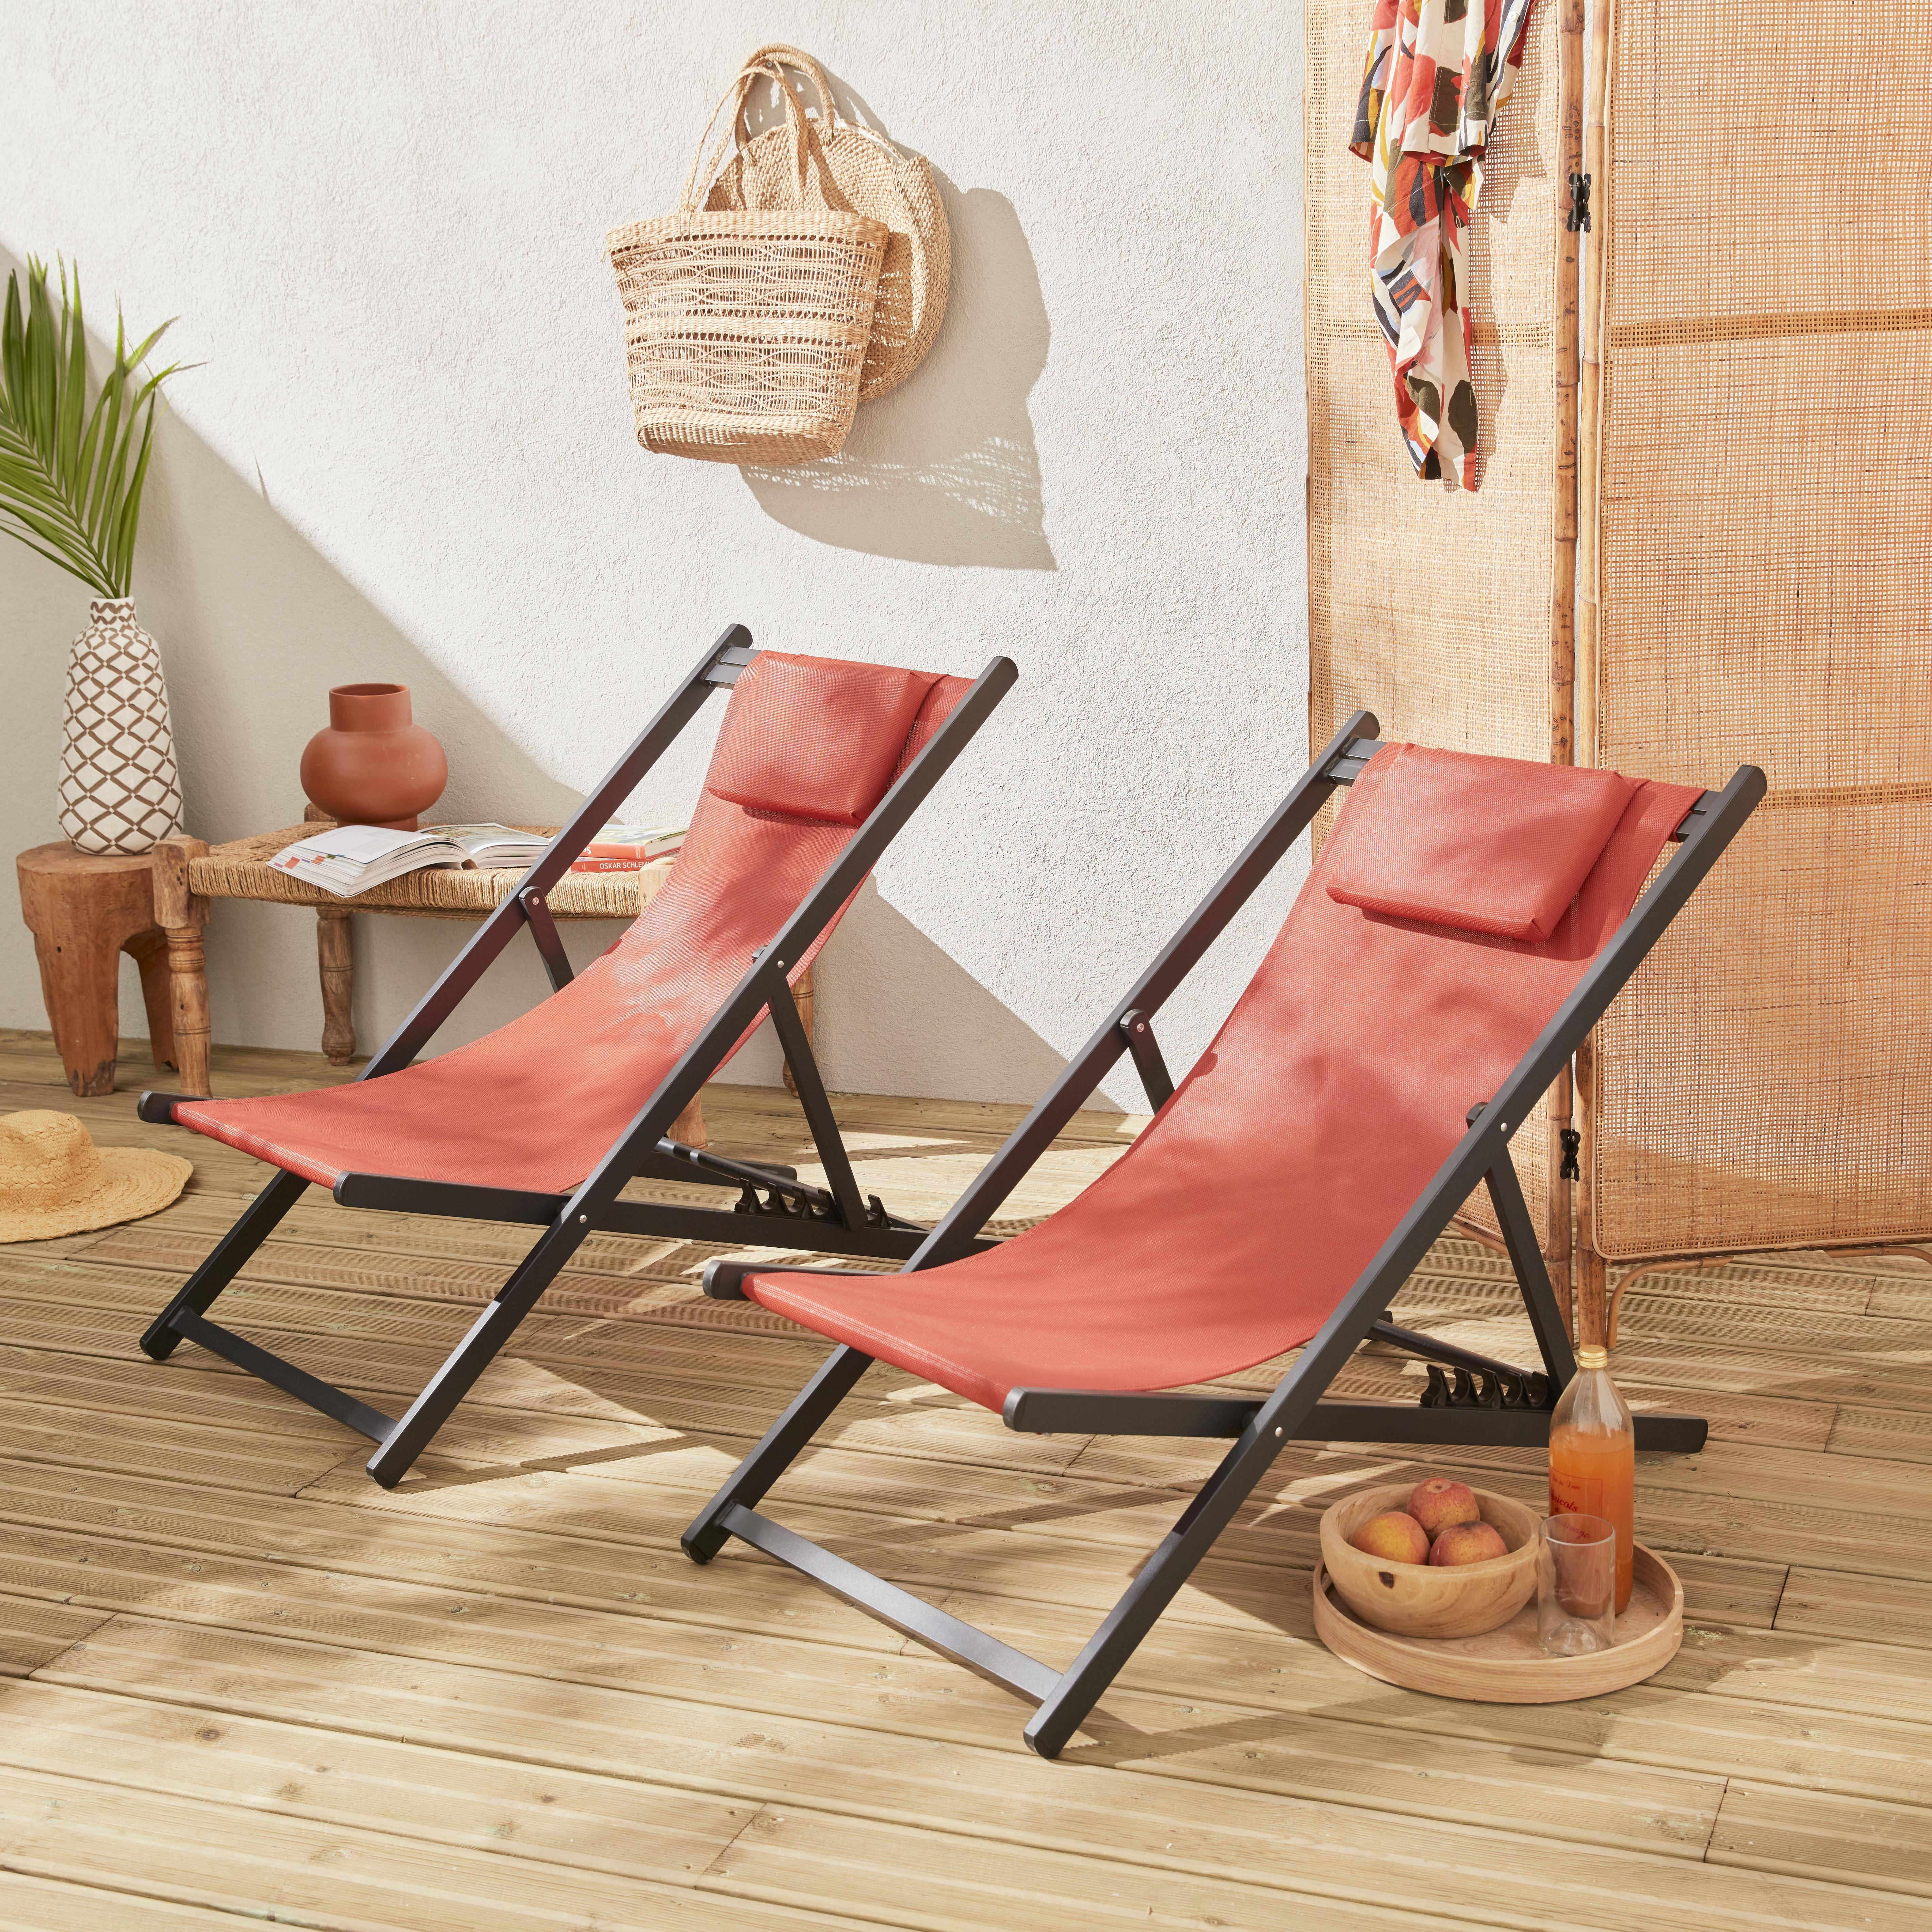 Set of 2 sun loungers - adjustable deck chairs with headrests made from aluminium frame - Gaia - Anthracite frame, Terracotta textilene Photo1